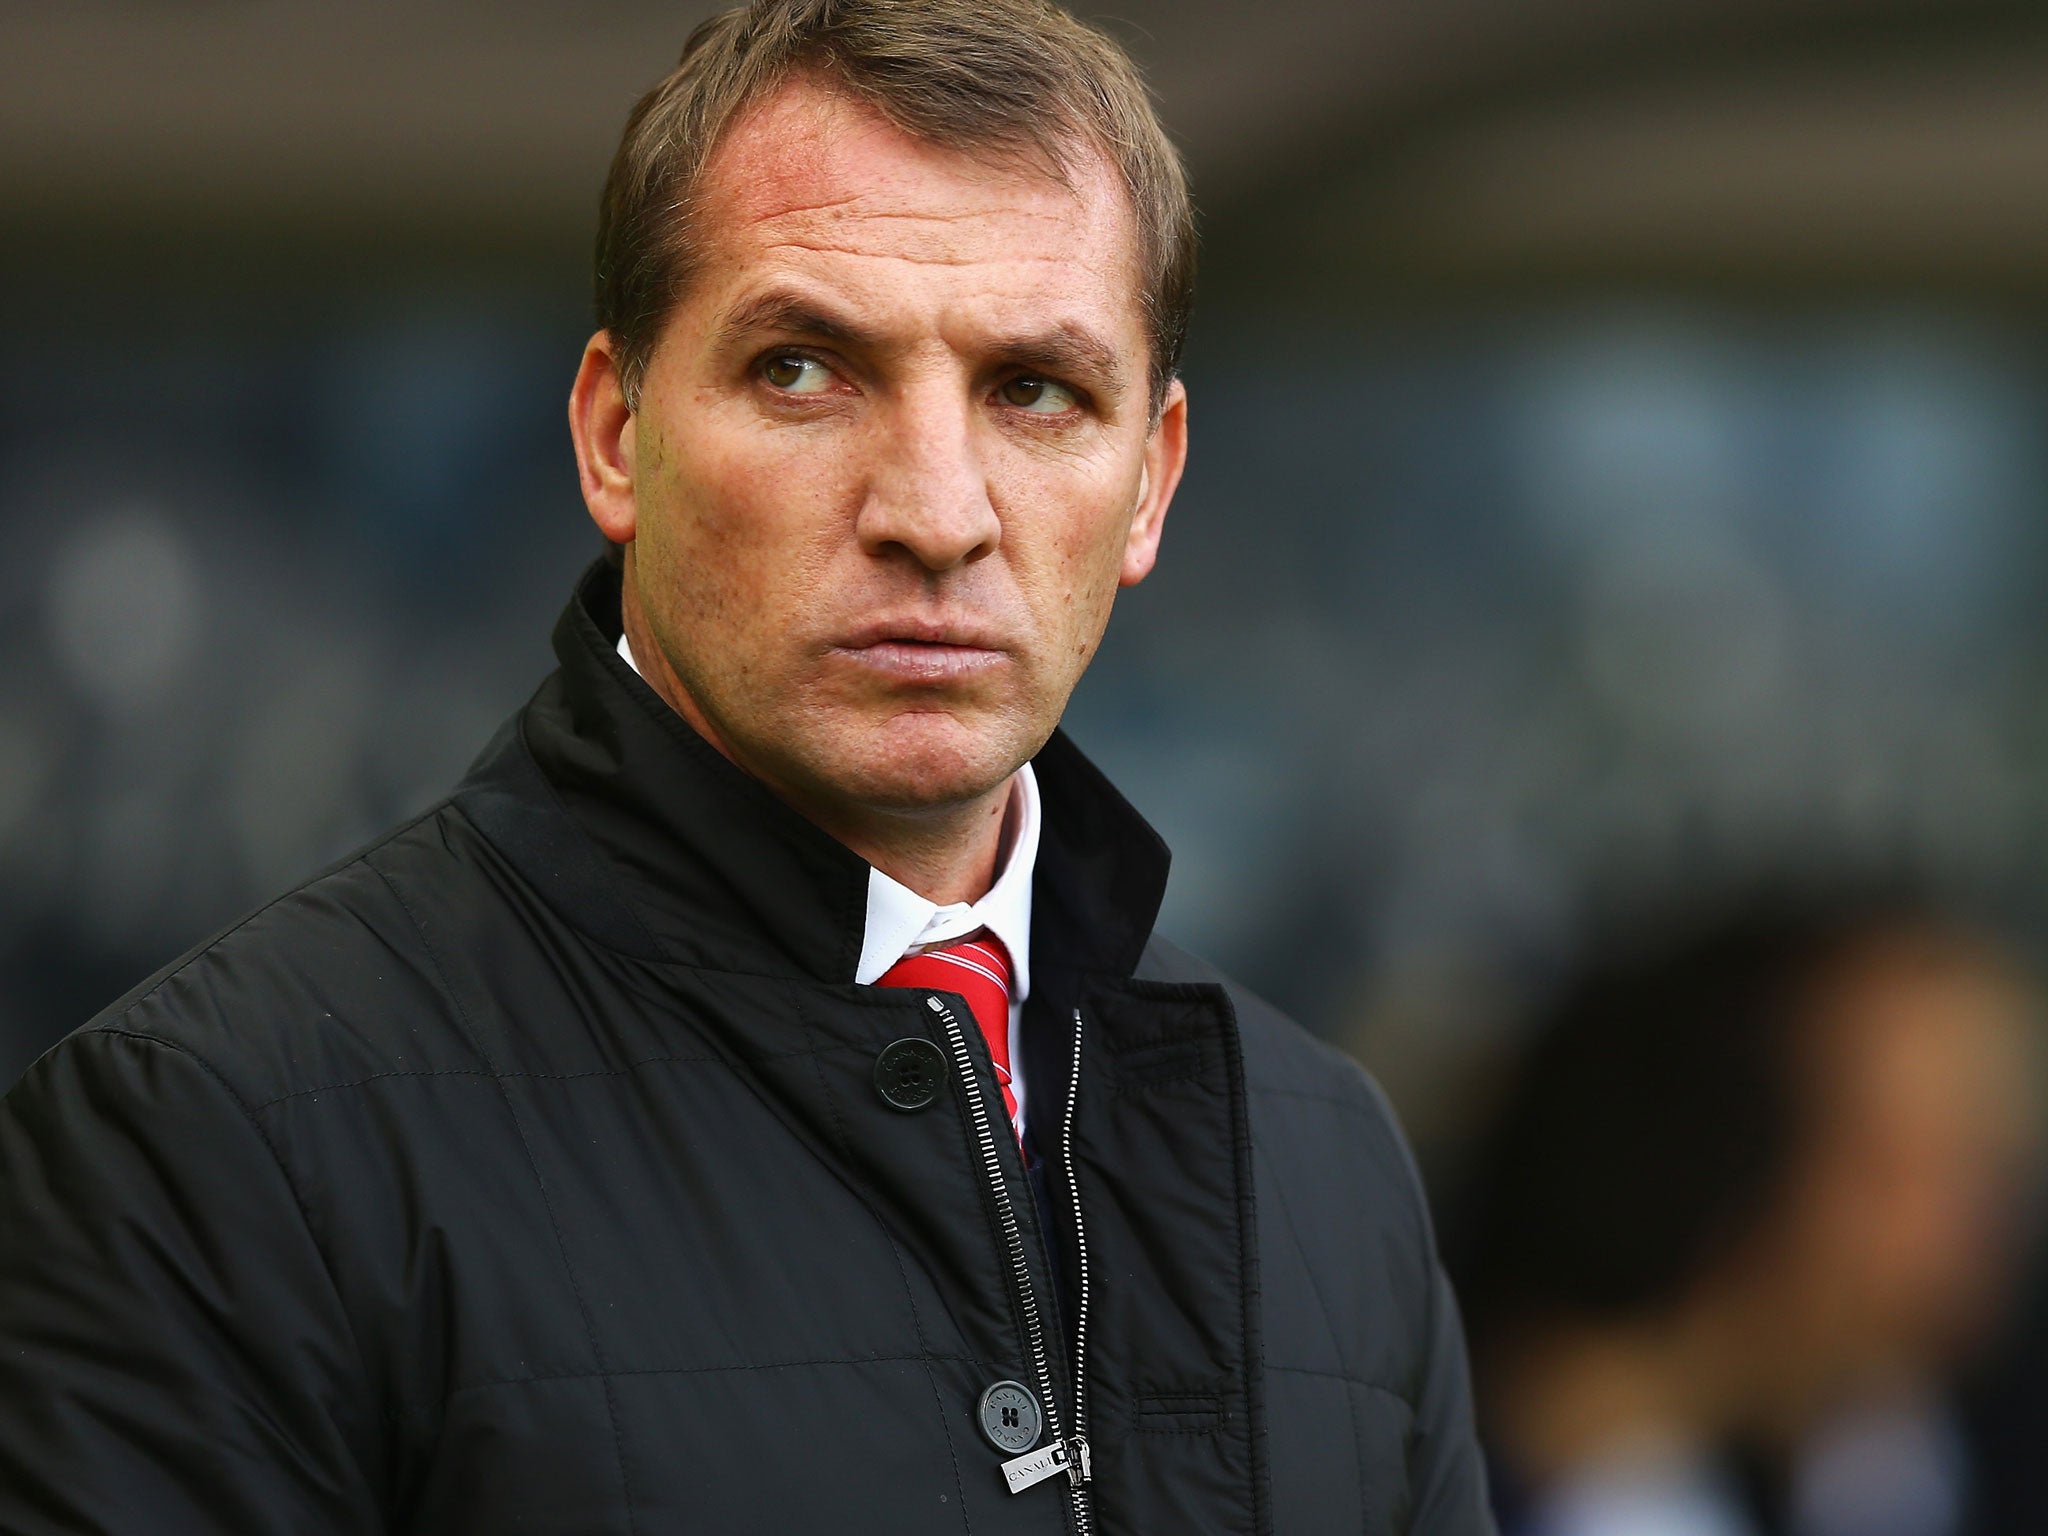 Brendan Rodgers will meet mentor Jose Mourinho for the first time on Sunday